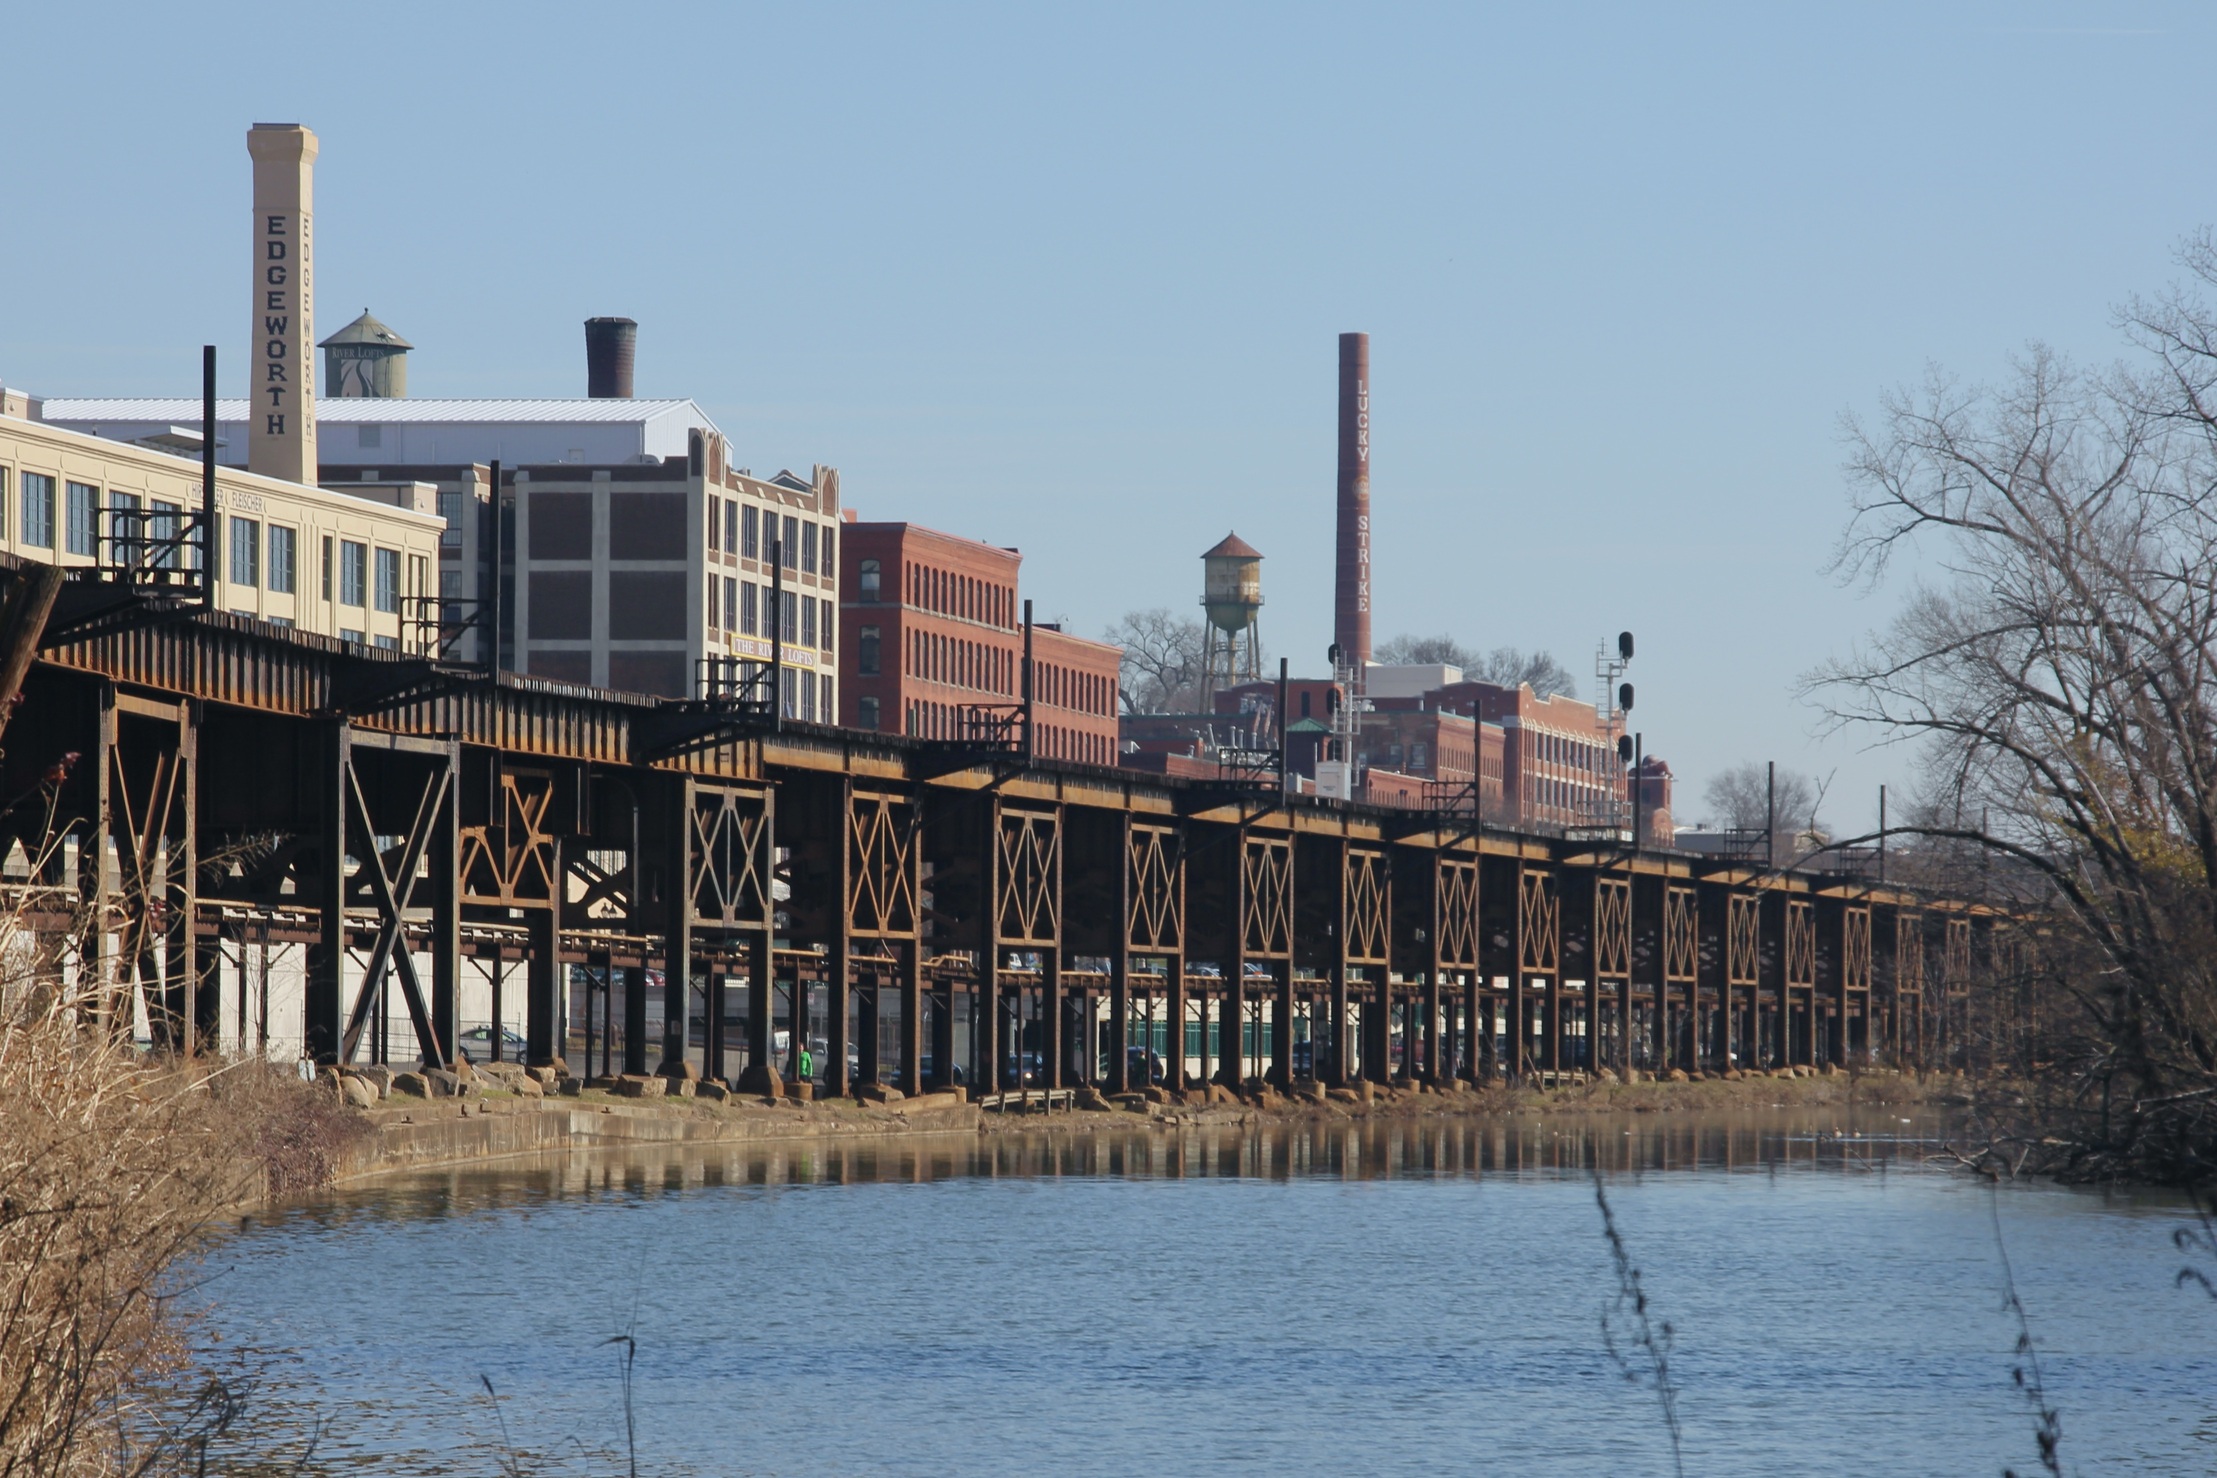 A view of some historic factories in Virginia.